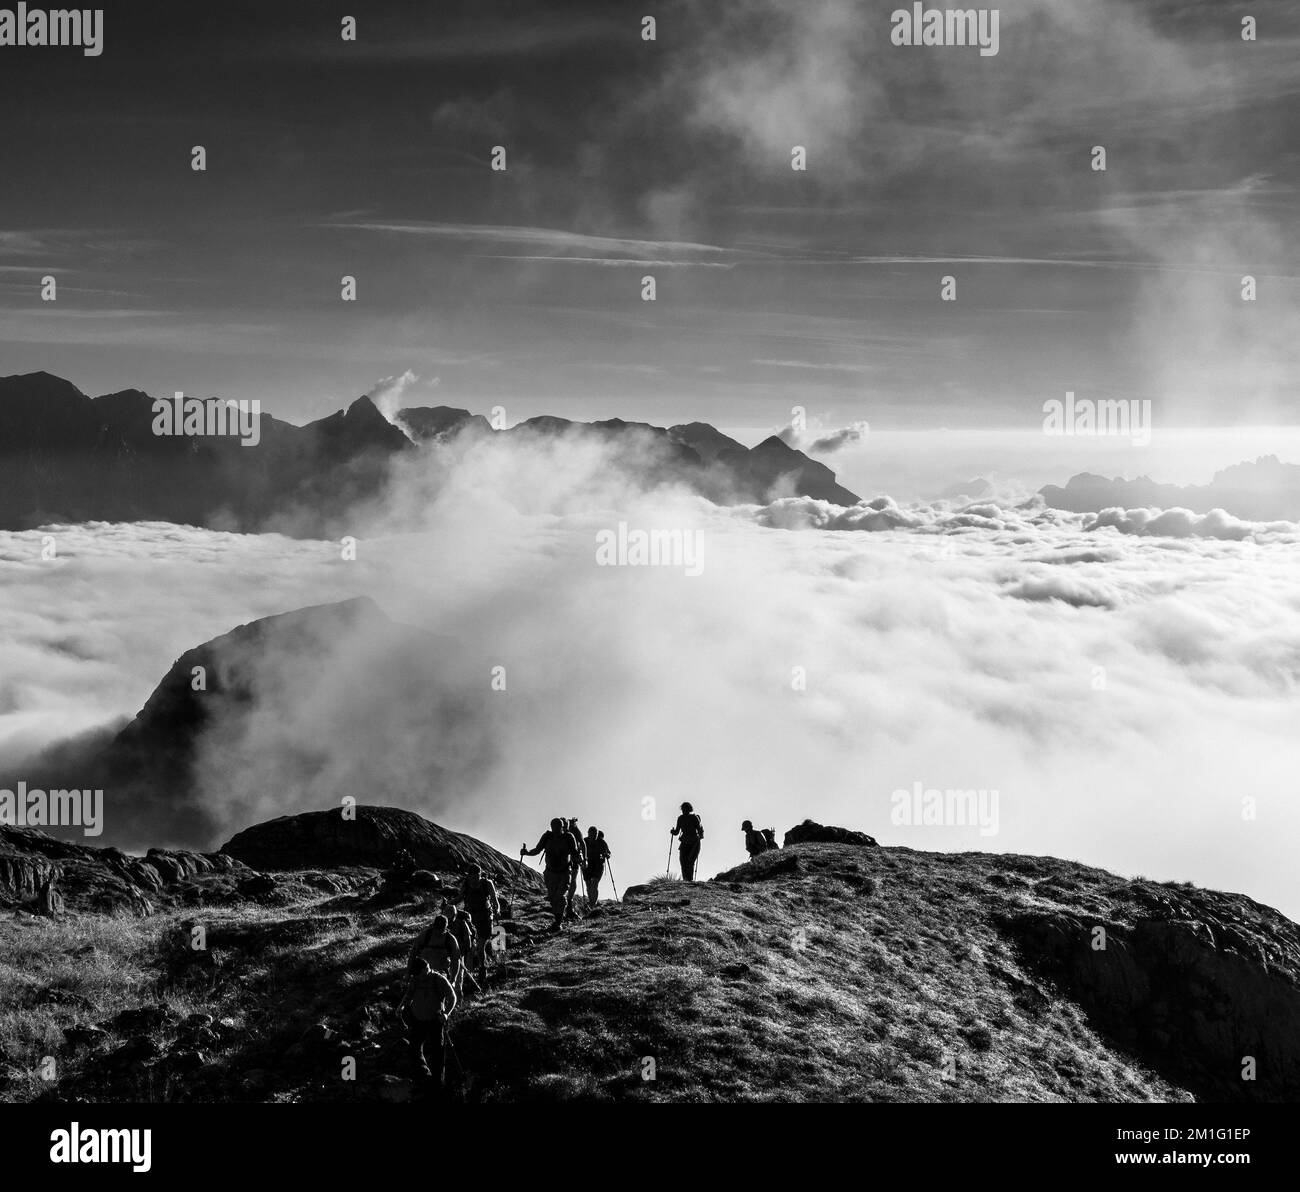 Hikers ascend the mountain, breaking out of the clouds. Tide of clouds. Hochkönig mountain. Berchtesgaden Alps, Salzburgerland, Austria. Stock Photo